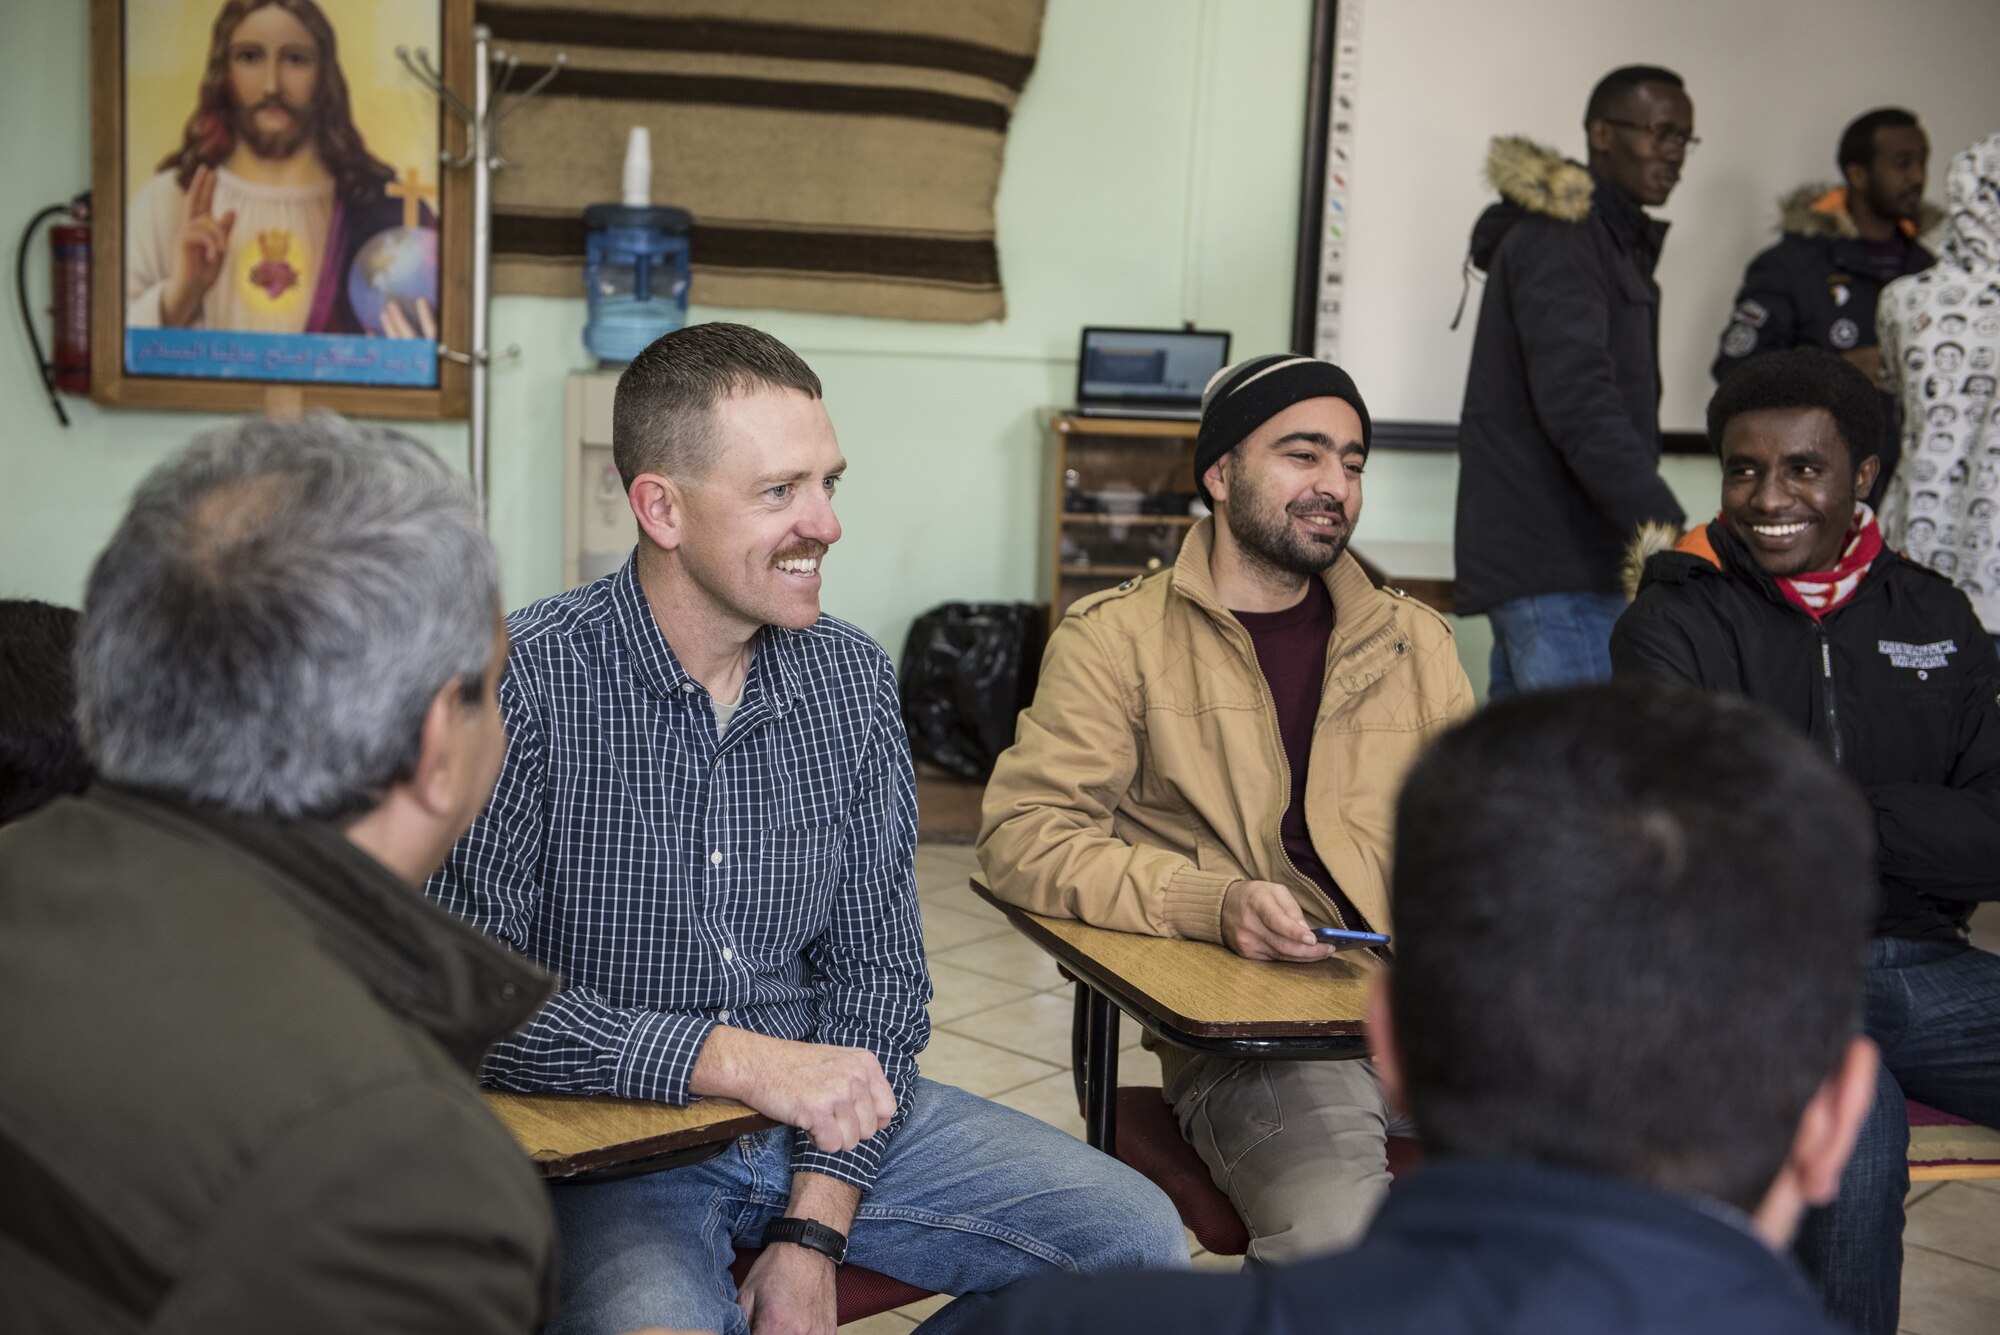 U.S. Air Force Master Sgt. Kelly Baker, from the 332d Expeditionary Civil Engineer Squadron, interacts with locals at a community center January 6, 2018 in Southwest Asia. Baker and other Airmen delivered clothing, books and supplies donated by service members deployed to an installation nearby. (U.S. Air Force photo by Staff Sgt. Joshua Kleinholz)